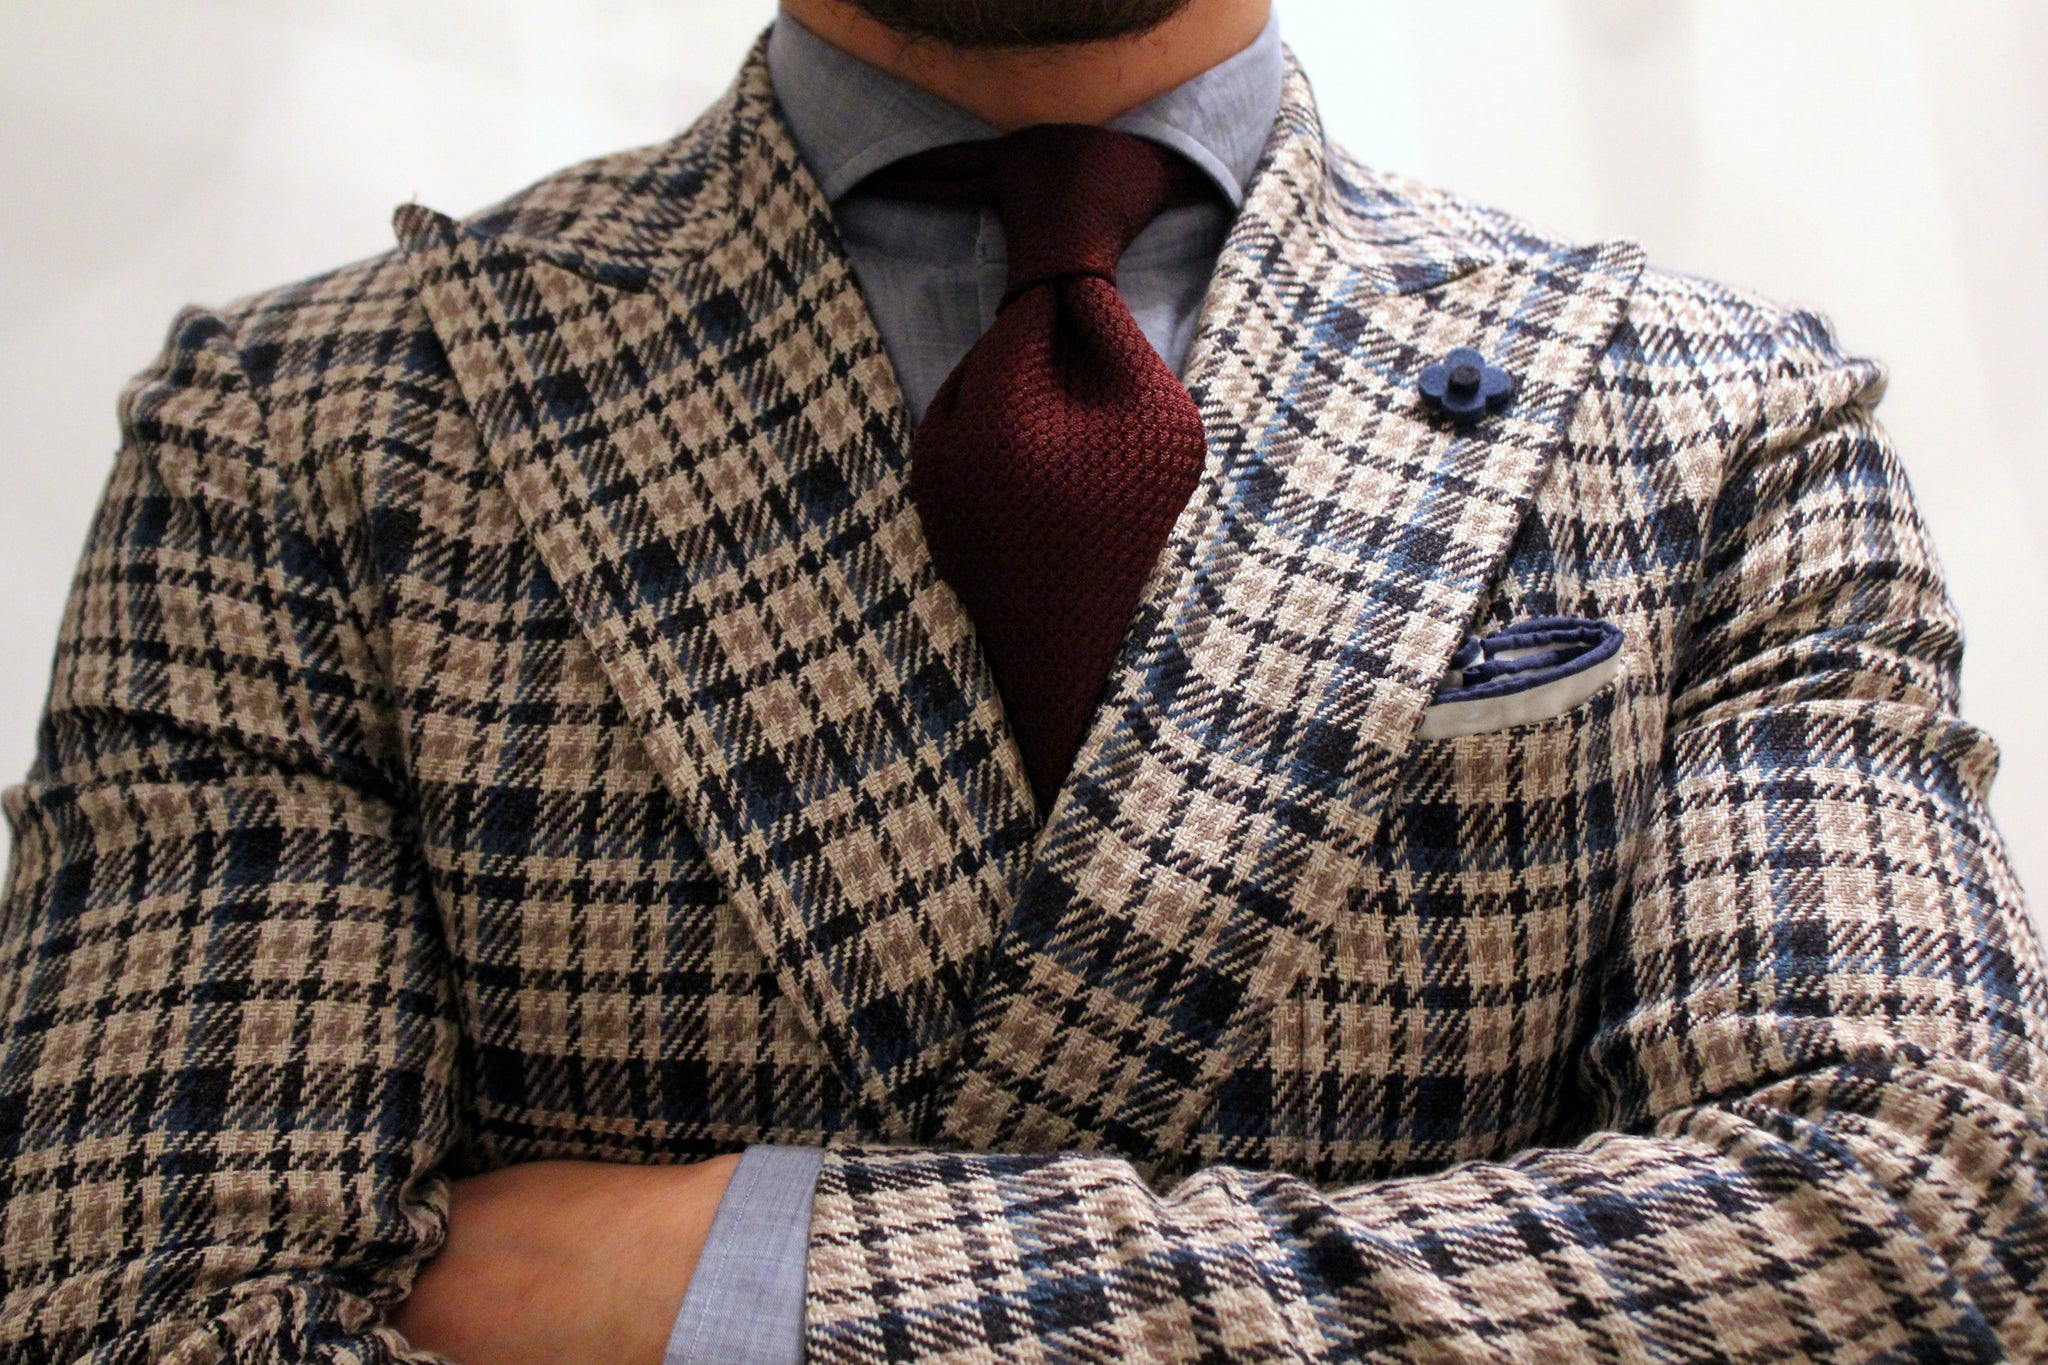 19012015 - Checked blazer in the office